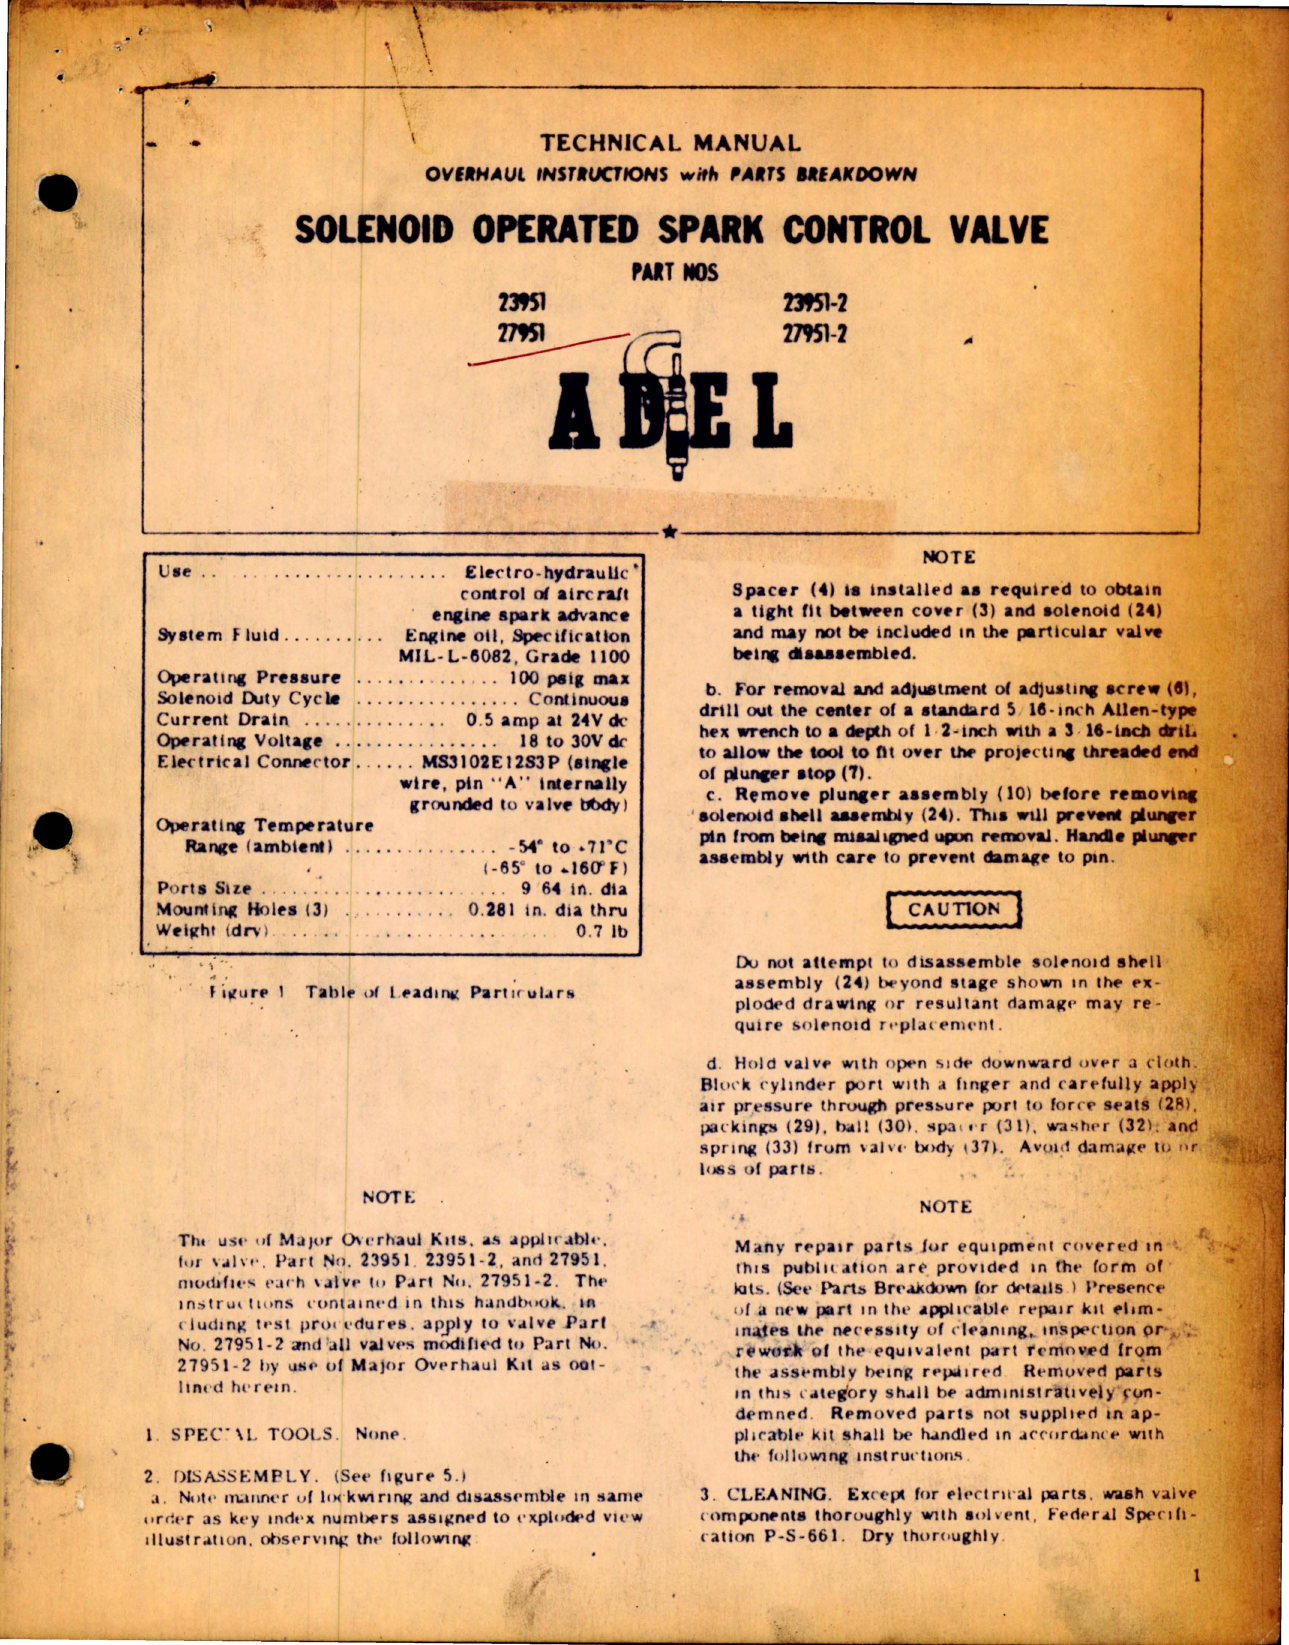 Sample page 1 from AirCorps Library document: Overhaul Instructions with Parts for Solenoid Operated Spark Control Valve - Parts 23951, 27951, 23951-2, and 27951-2